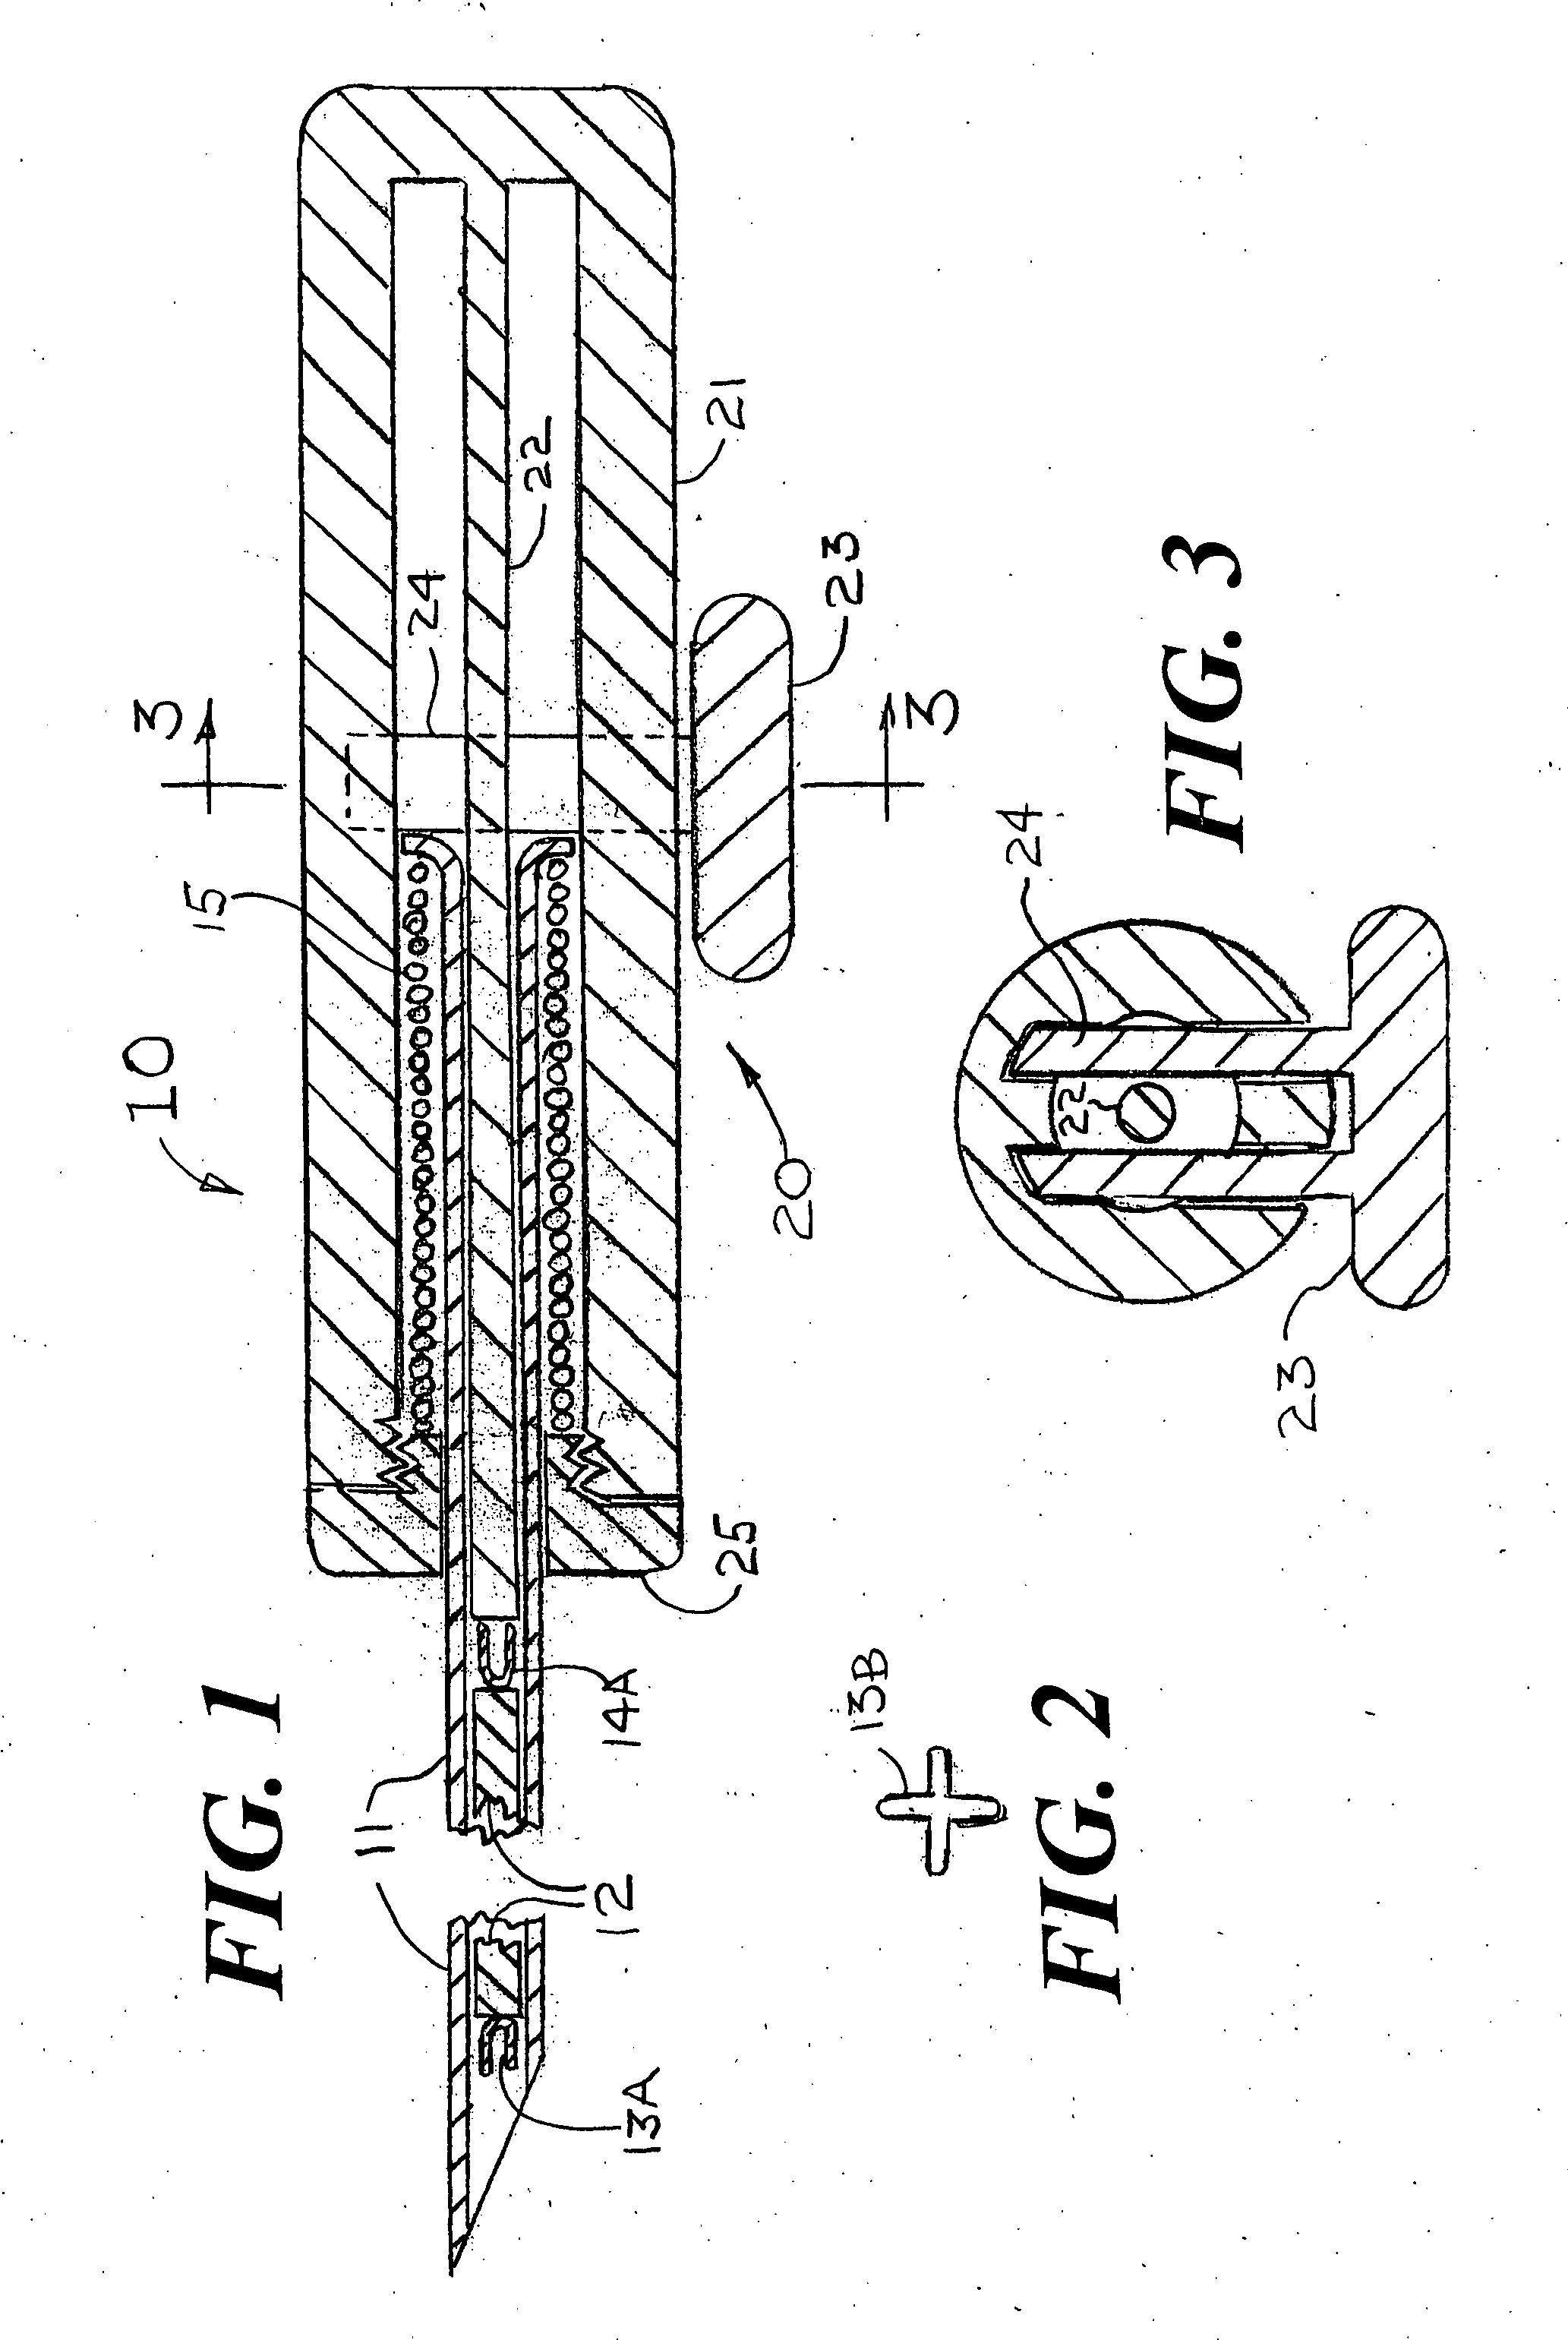 Means and method for marking human tissue that may be malignant